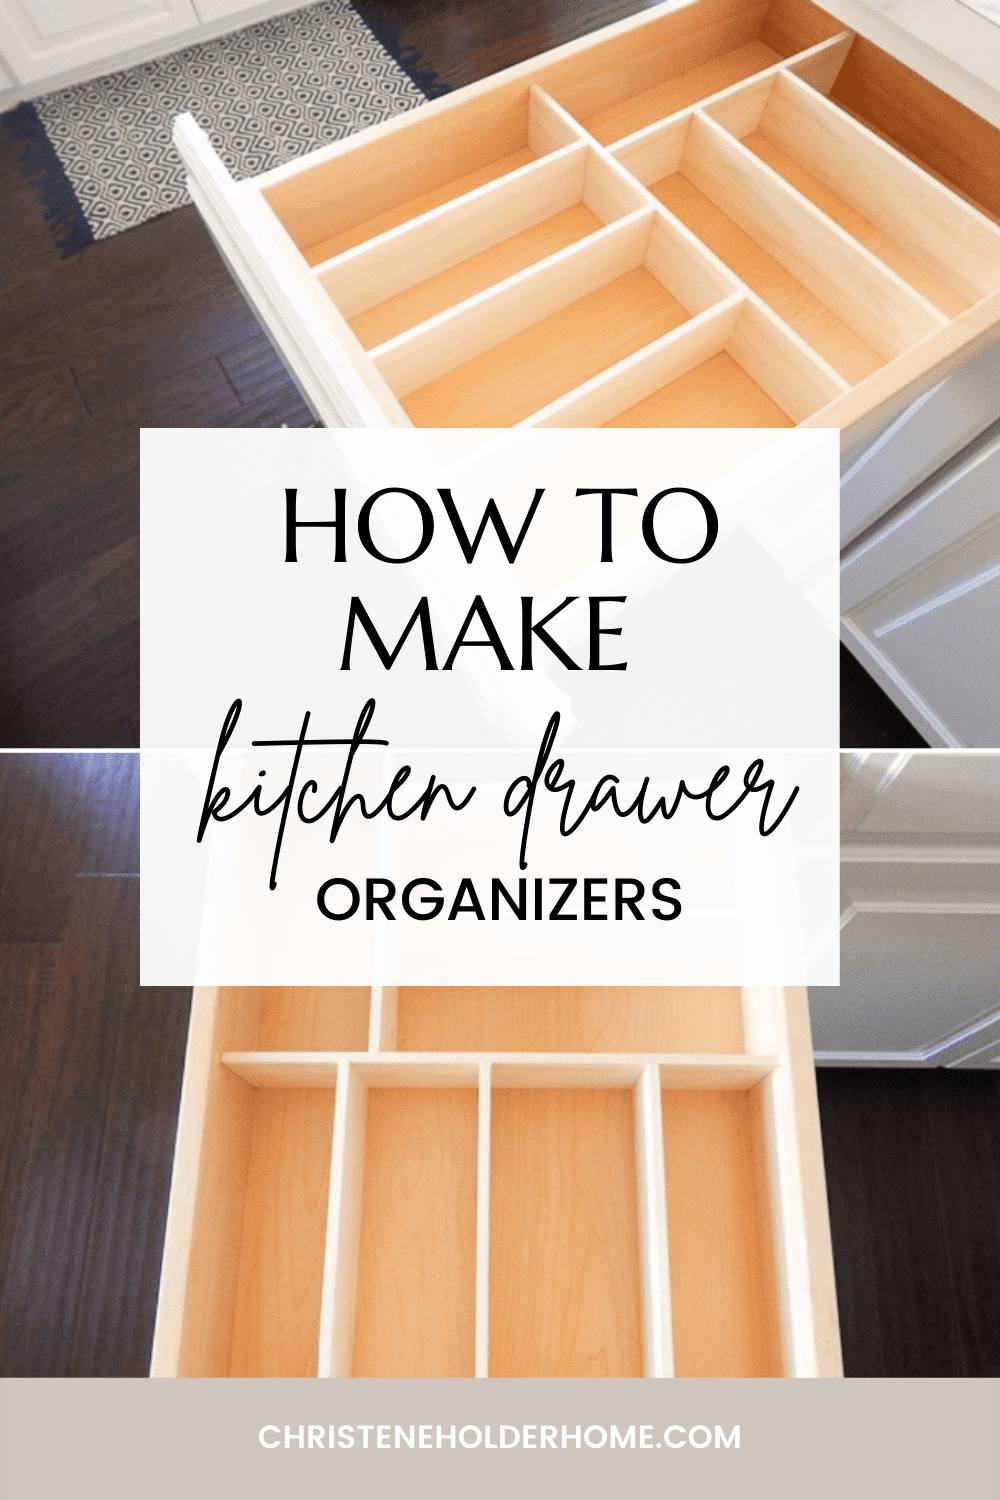 7 of the Best Kitchen Drawer Organizers in 2023, According to the